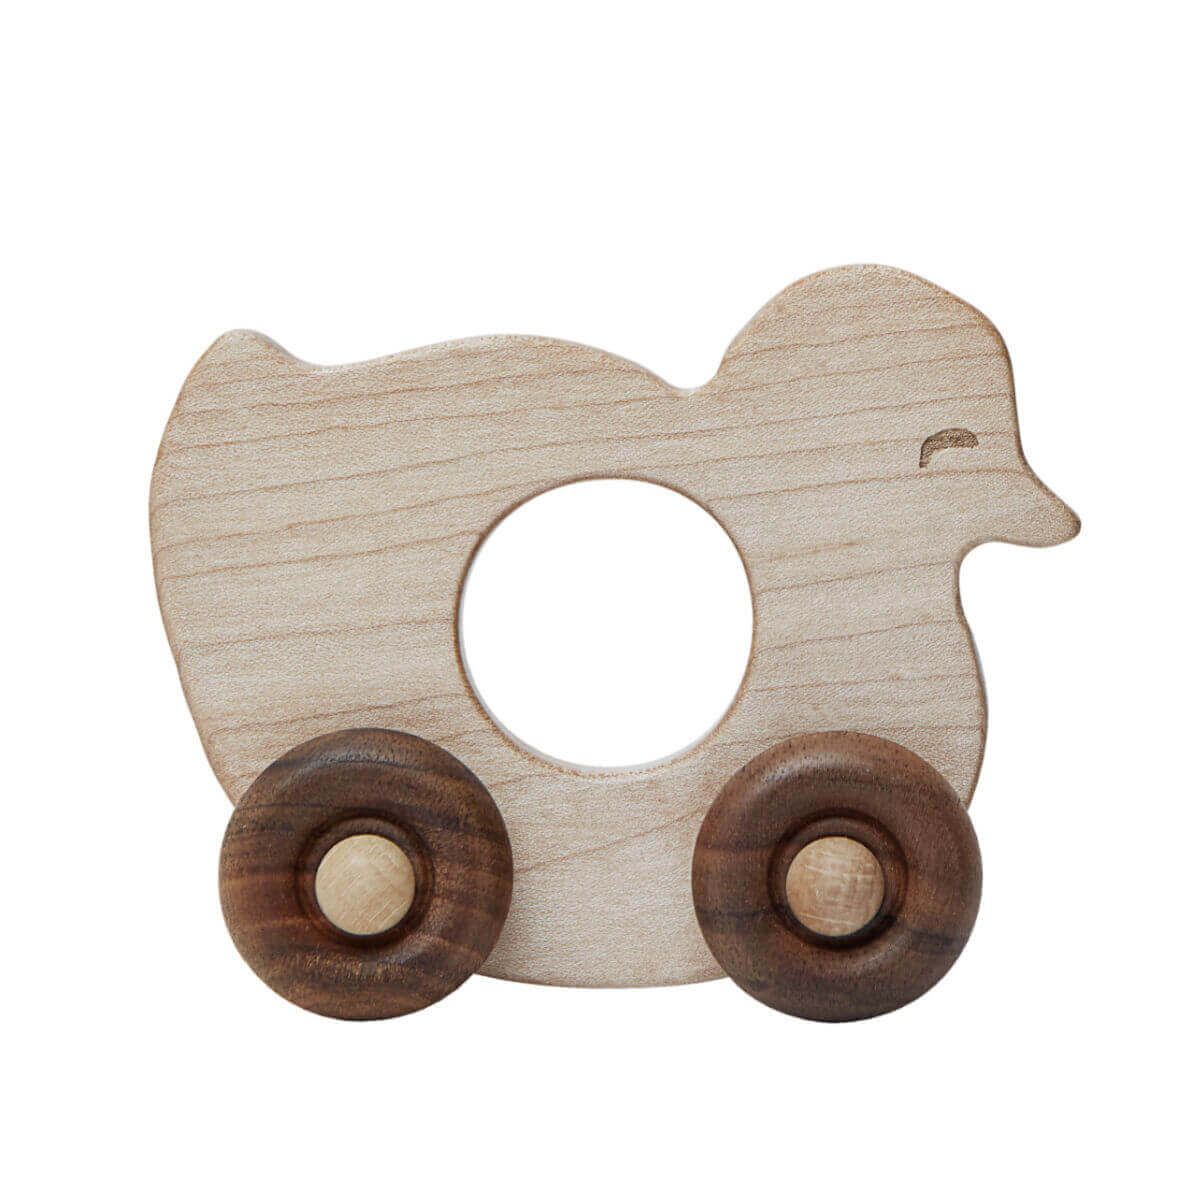 wooden baby duck push along toy by wooden story